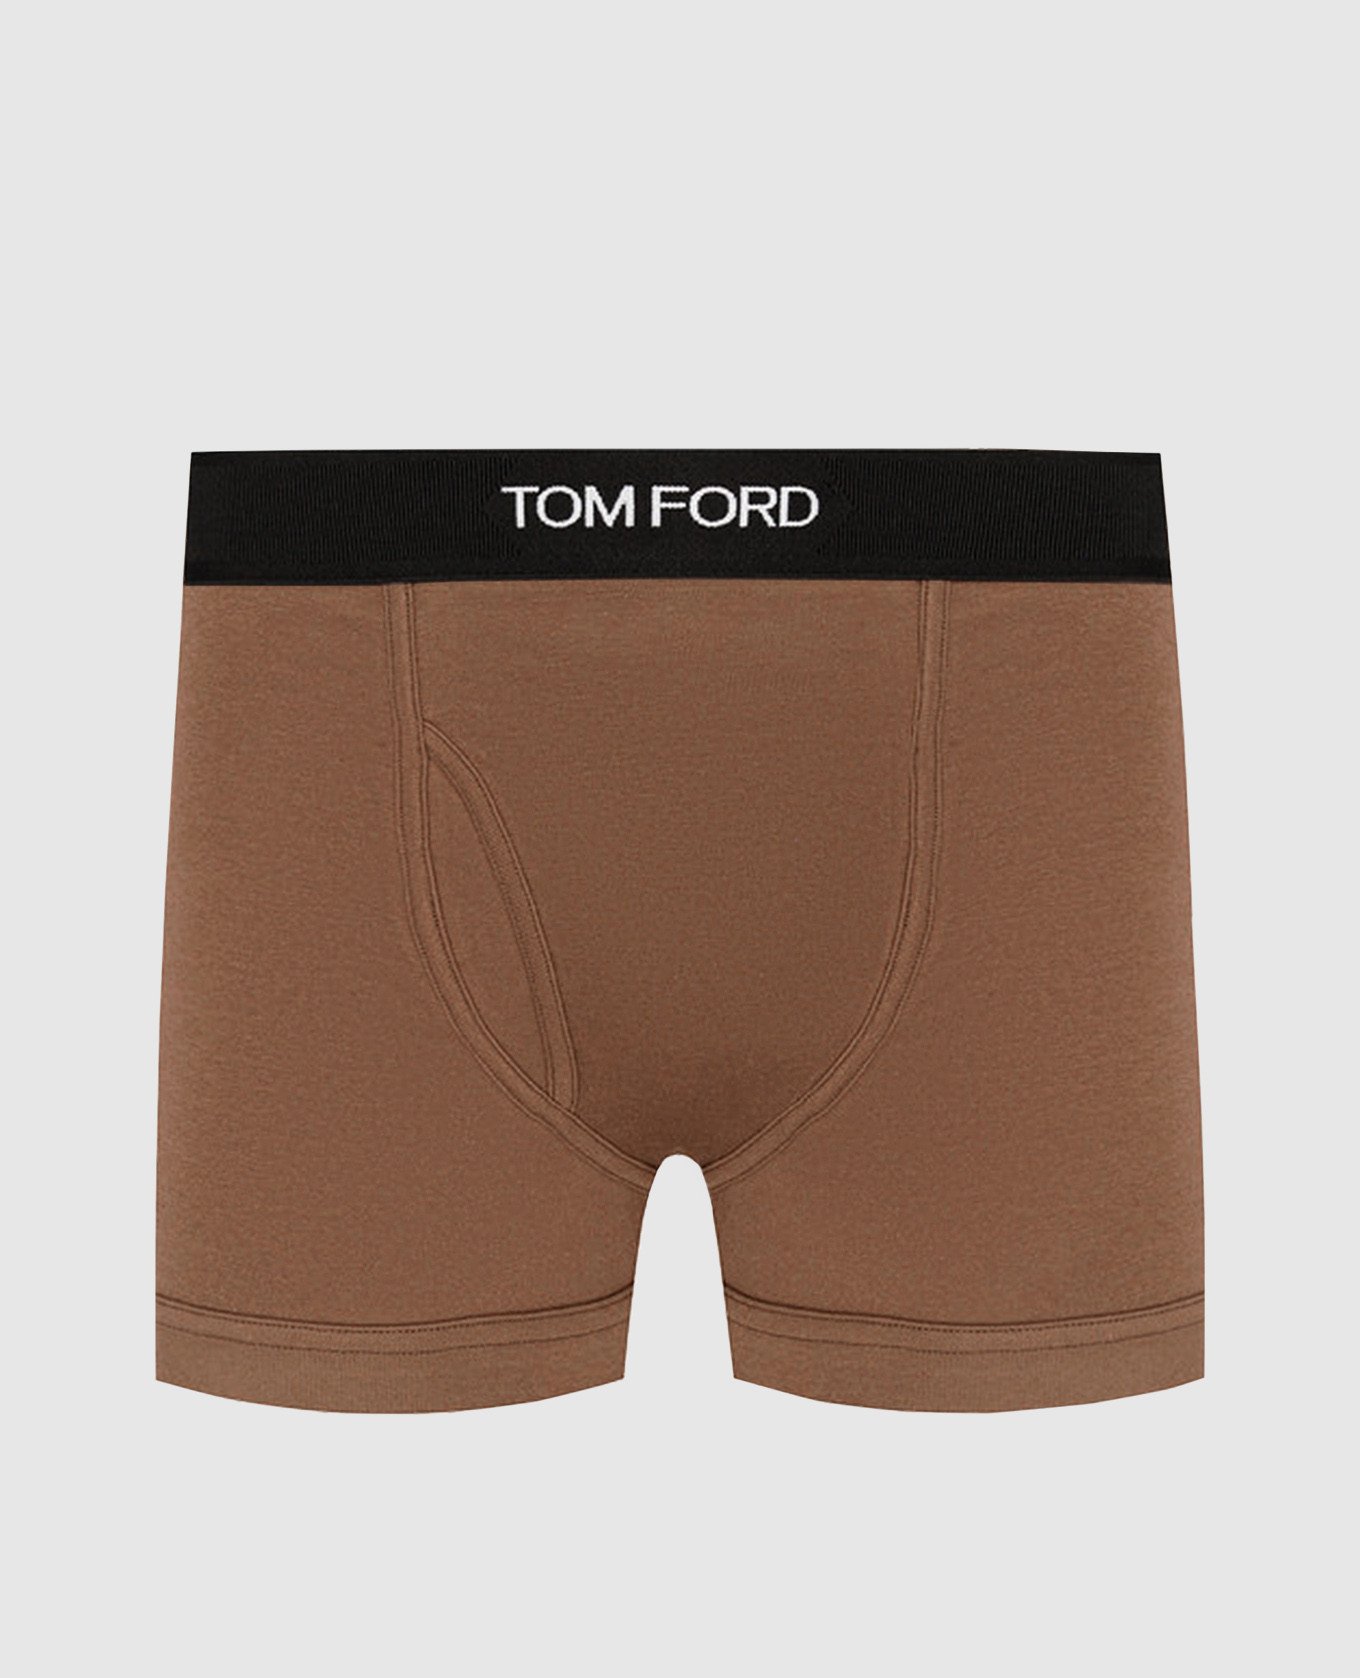 Brown boxer briefs with a logo pattern